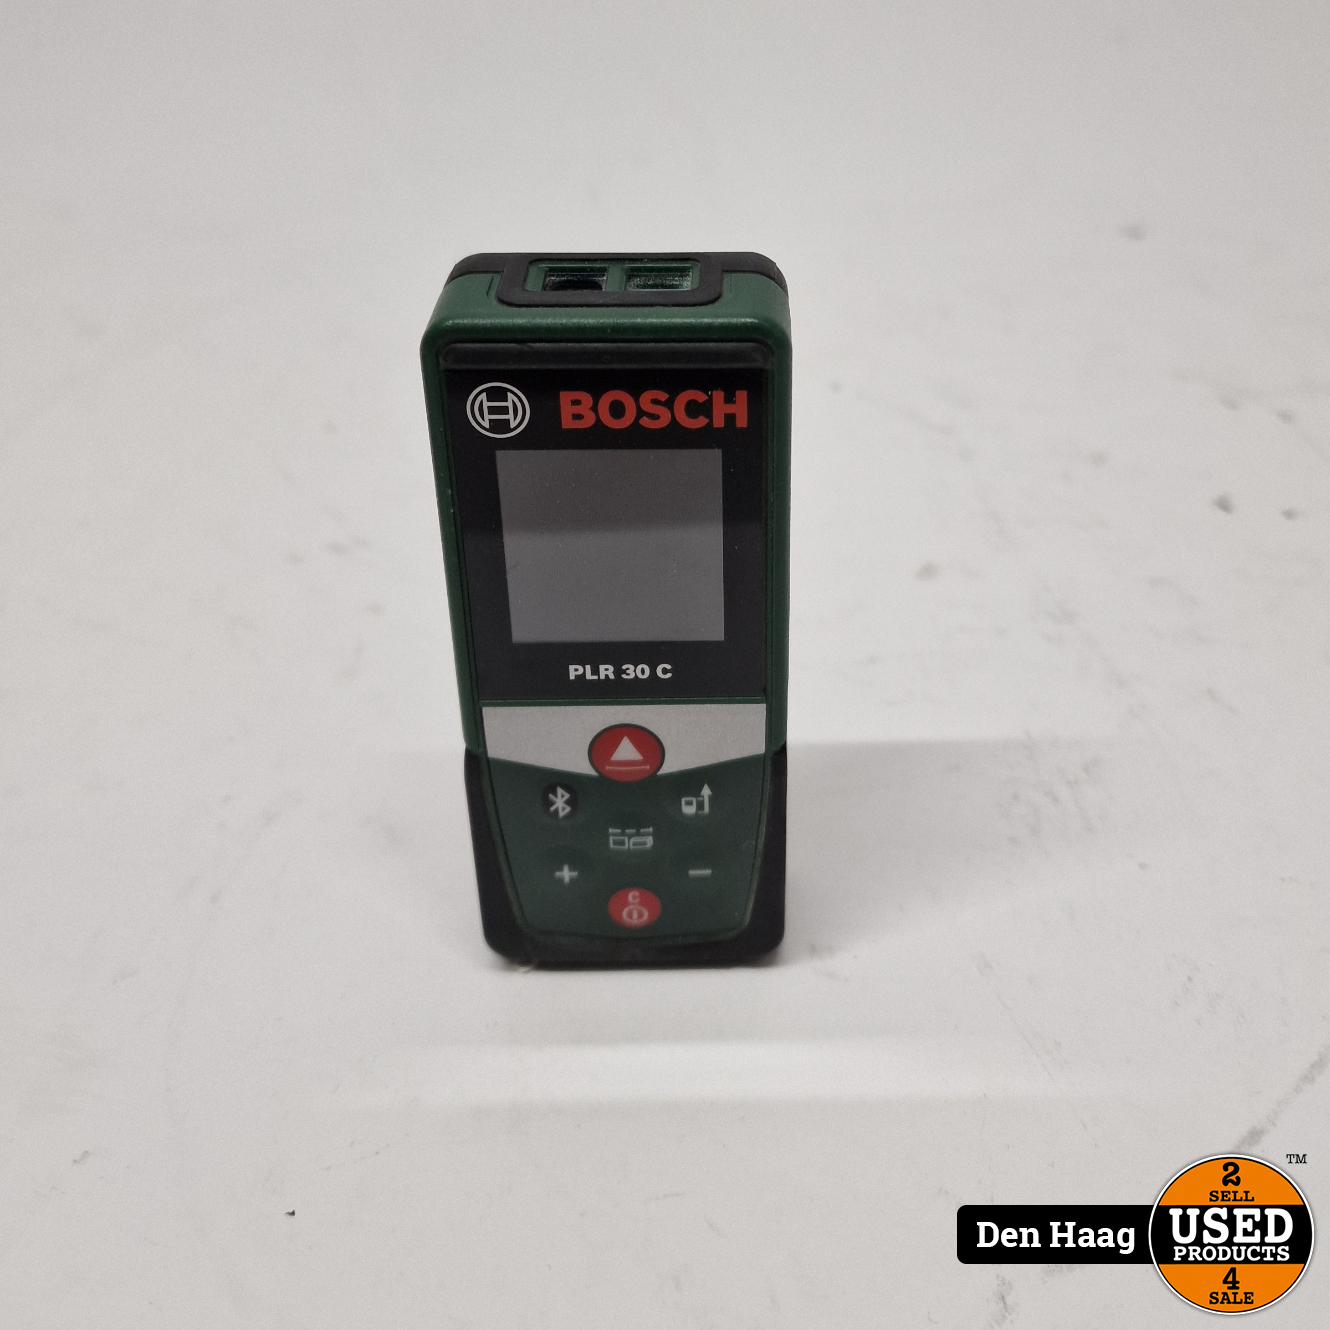 Bosch PLR30 C | nette staat - Used Products Den Haag